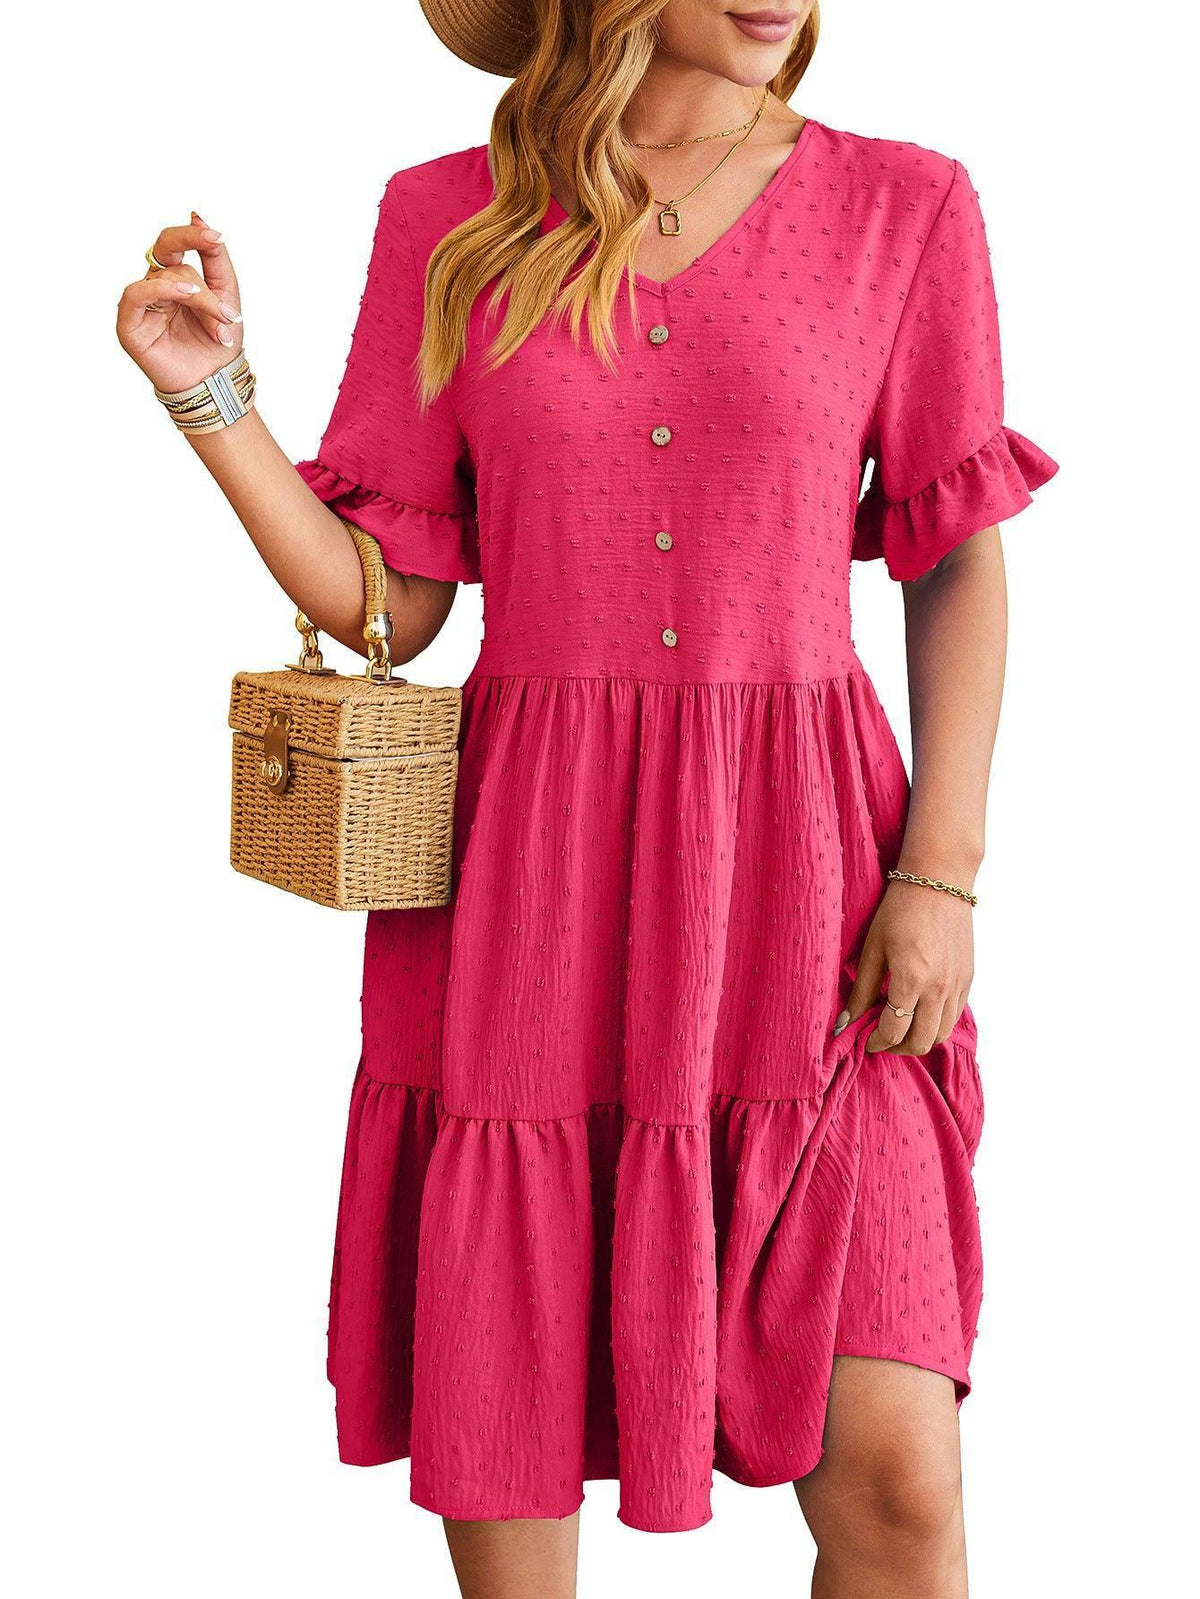 New V-neck Ruffle Short-sleeved Dress Summer Casual Fashion-Rose Red-2